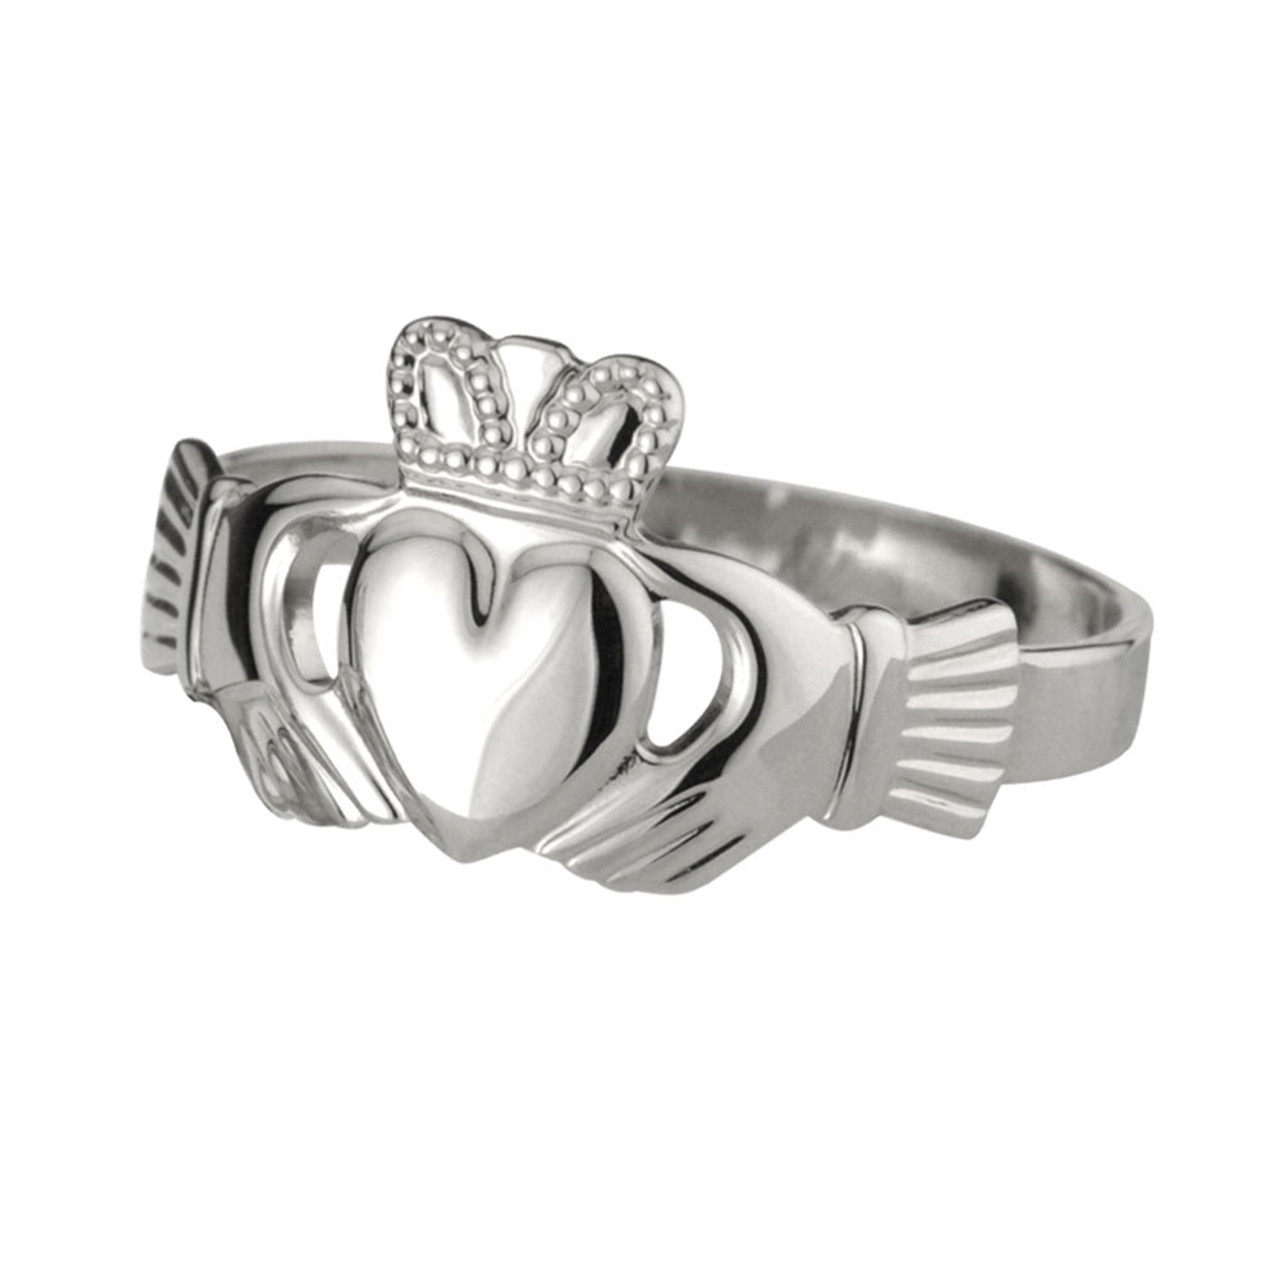 Classic Sterling Silver Men's Claddagh Ring